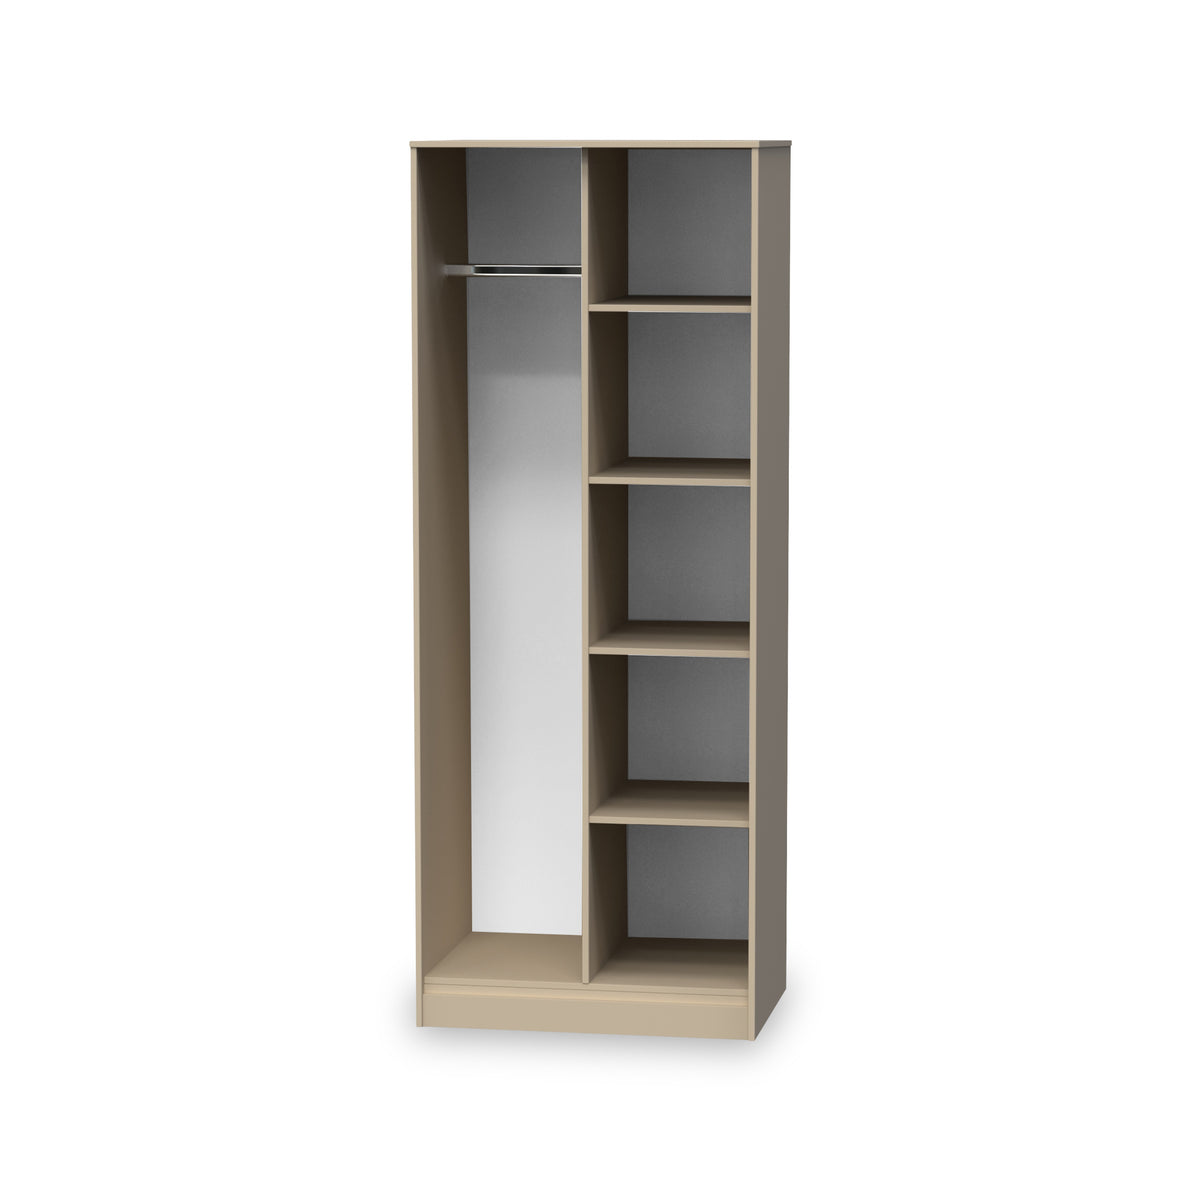 Harlow Taupe Open Shelf Unit from Roseland Furniture